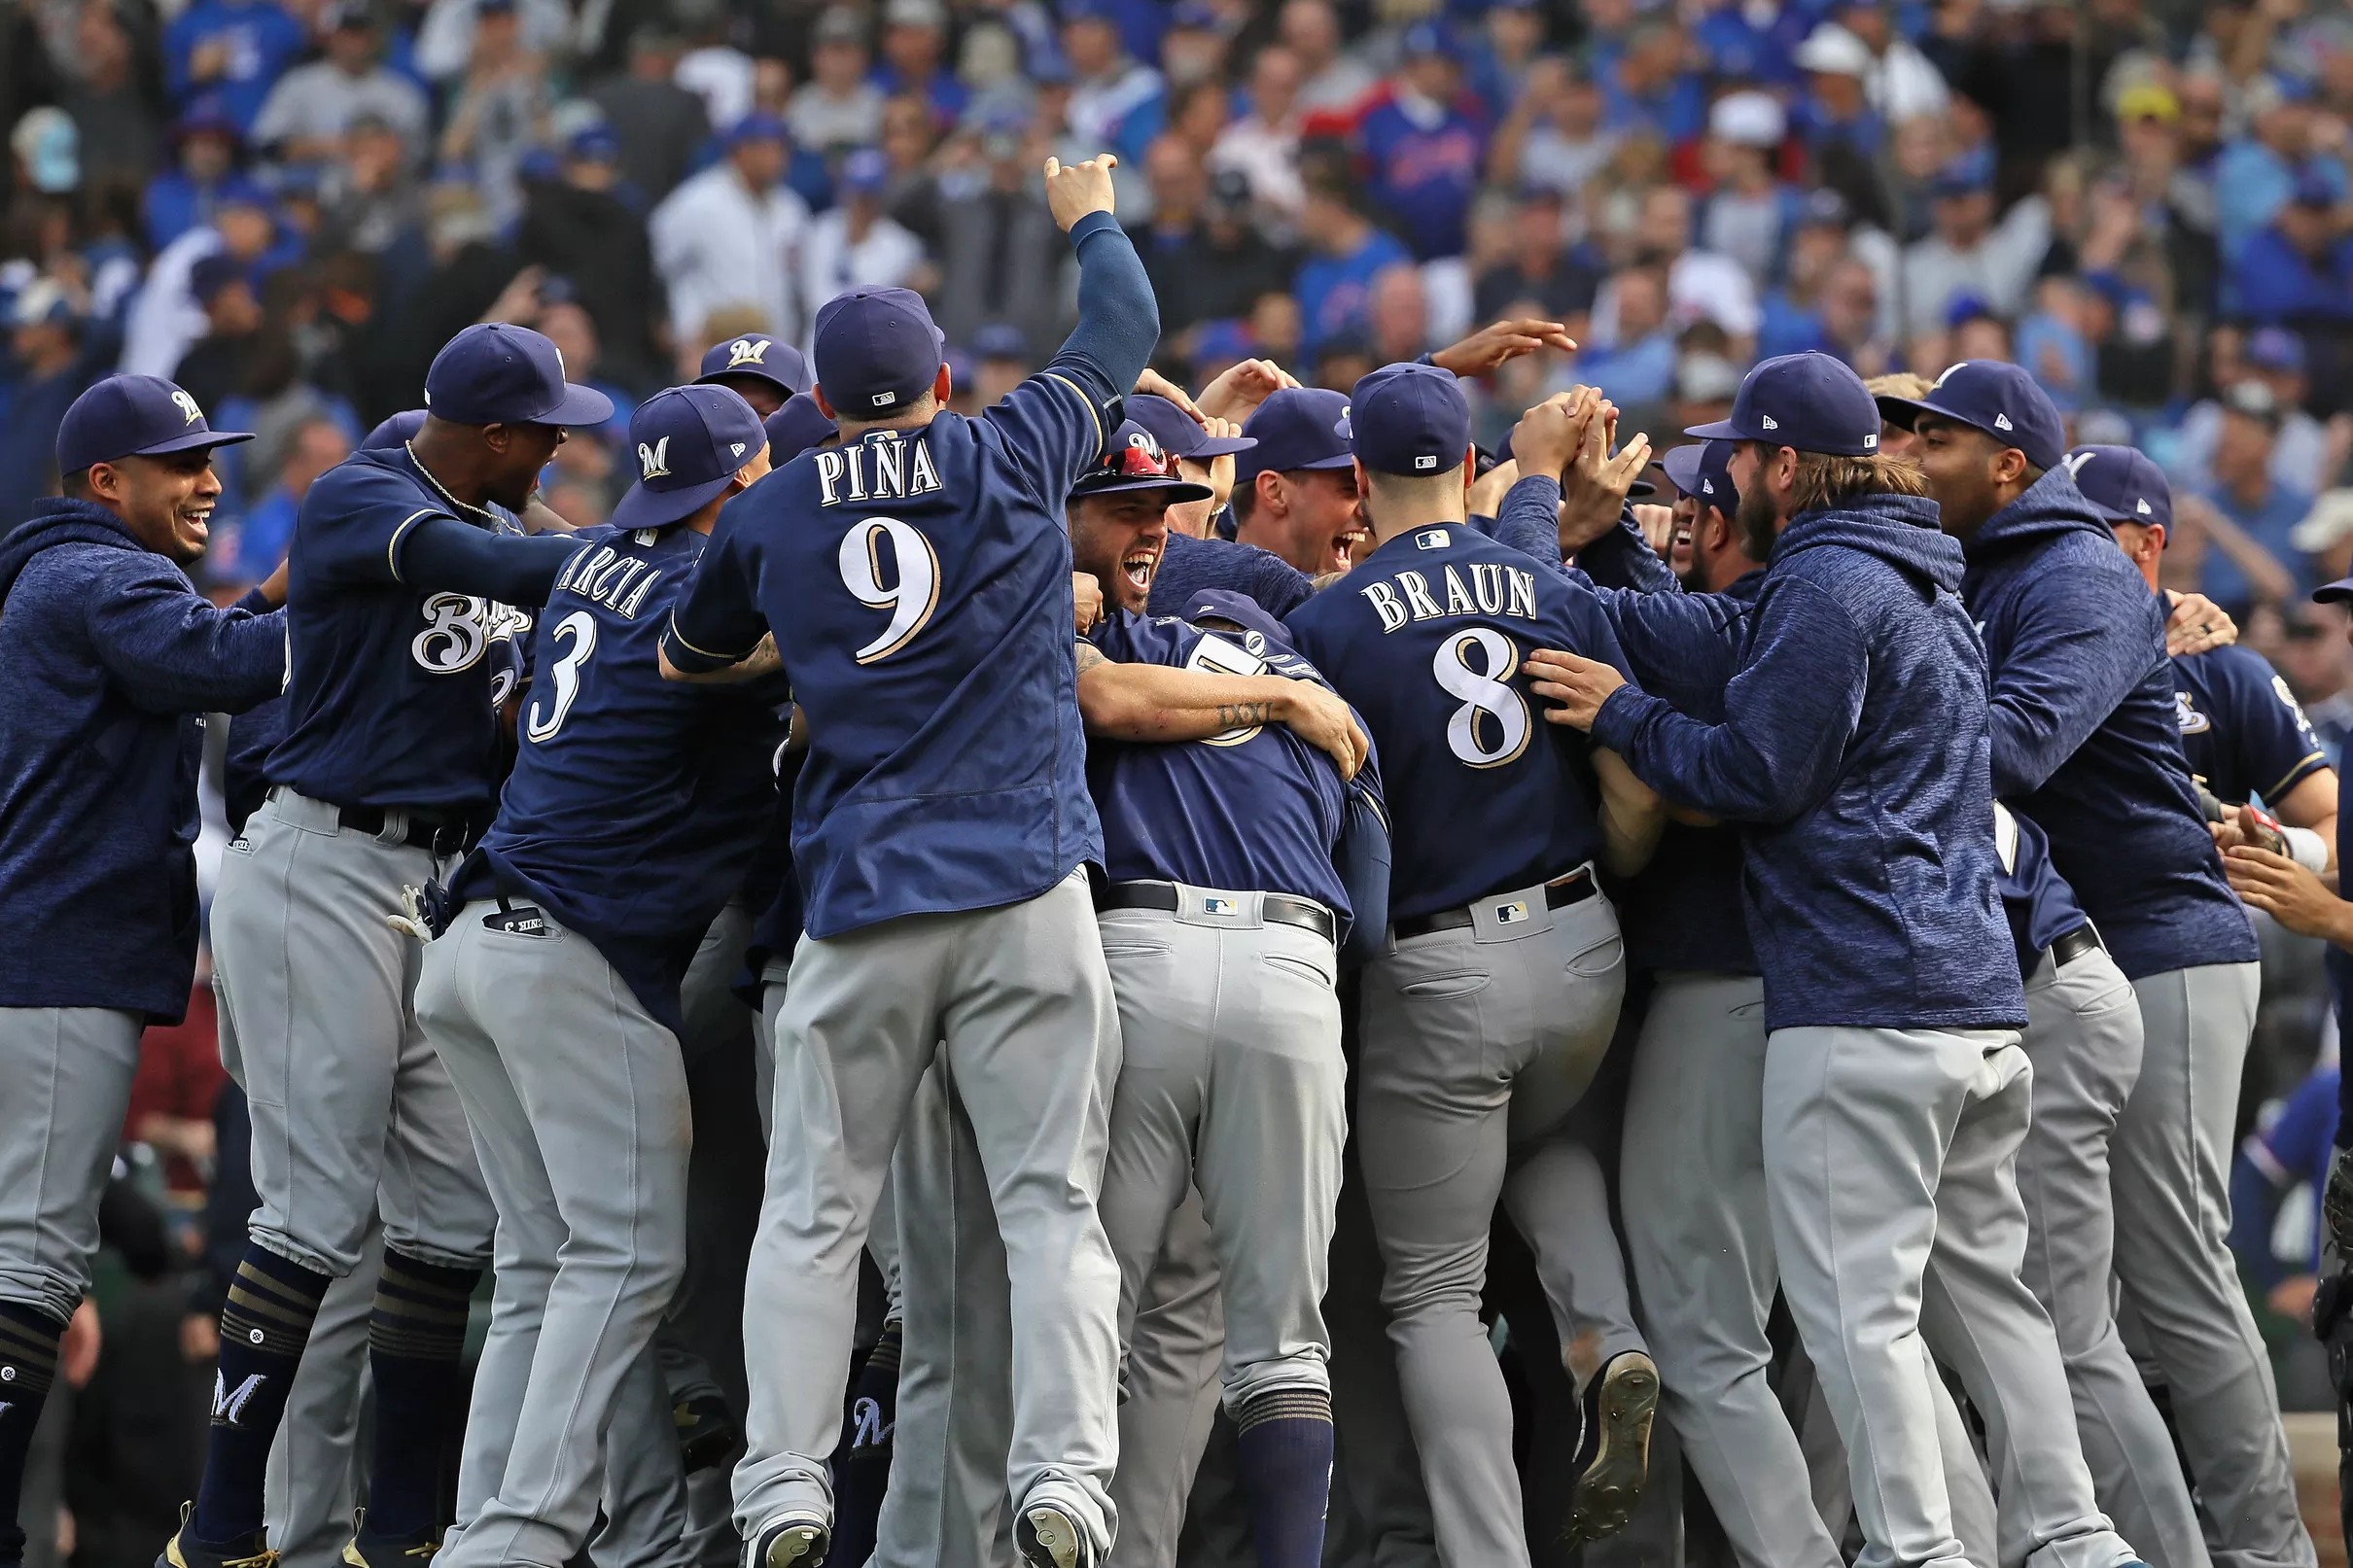 The Brewers’ unique MLB philosophy and strategies are rooted in high